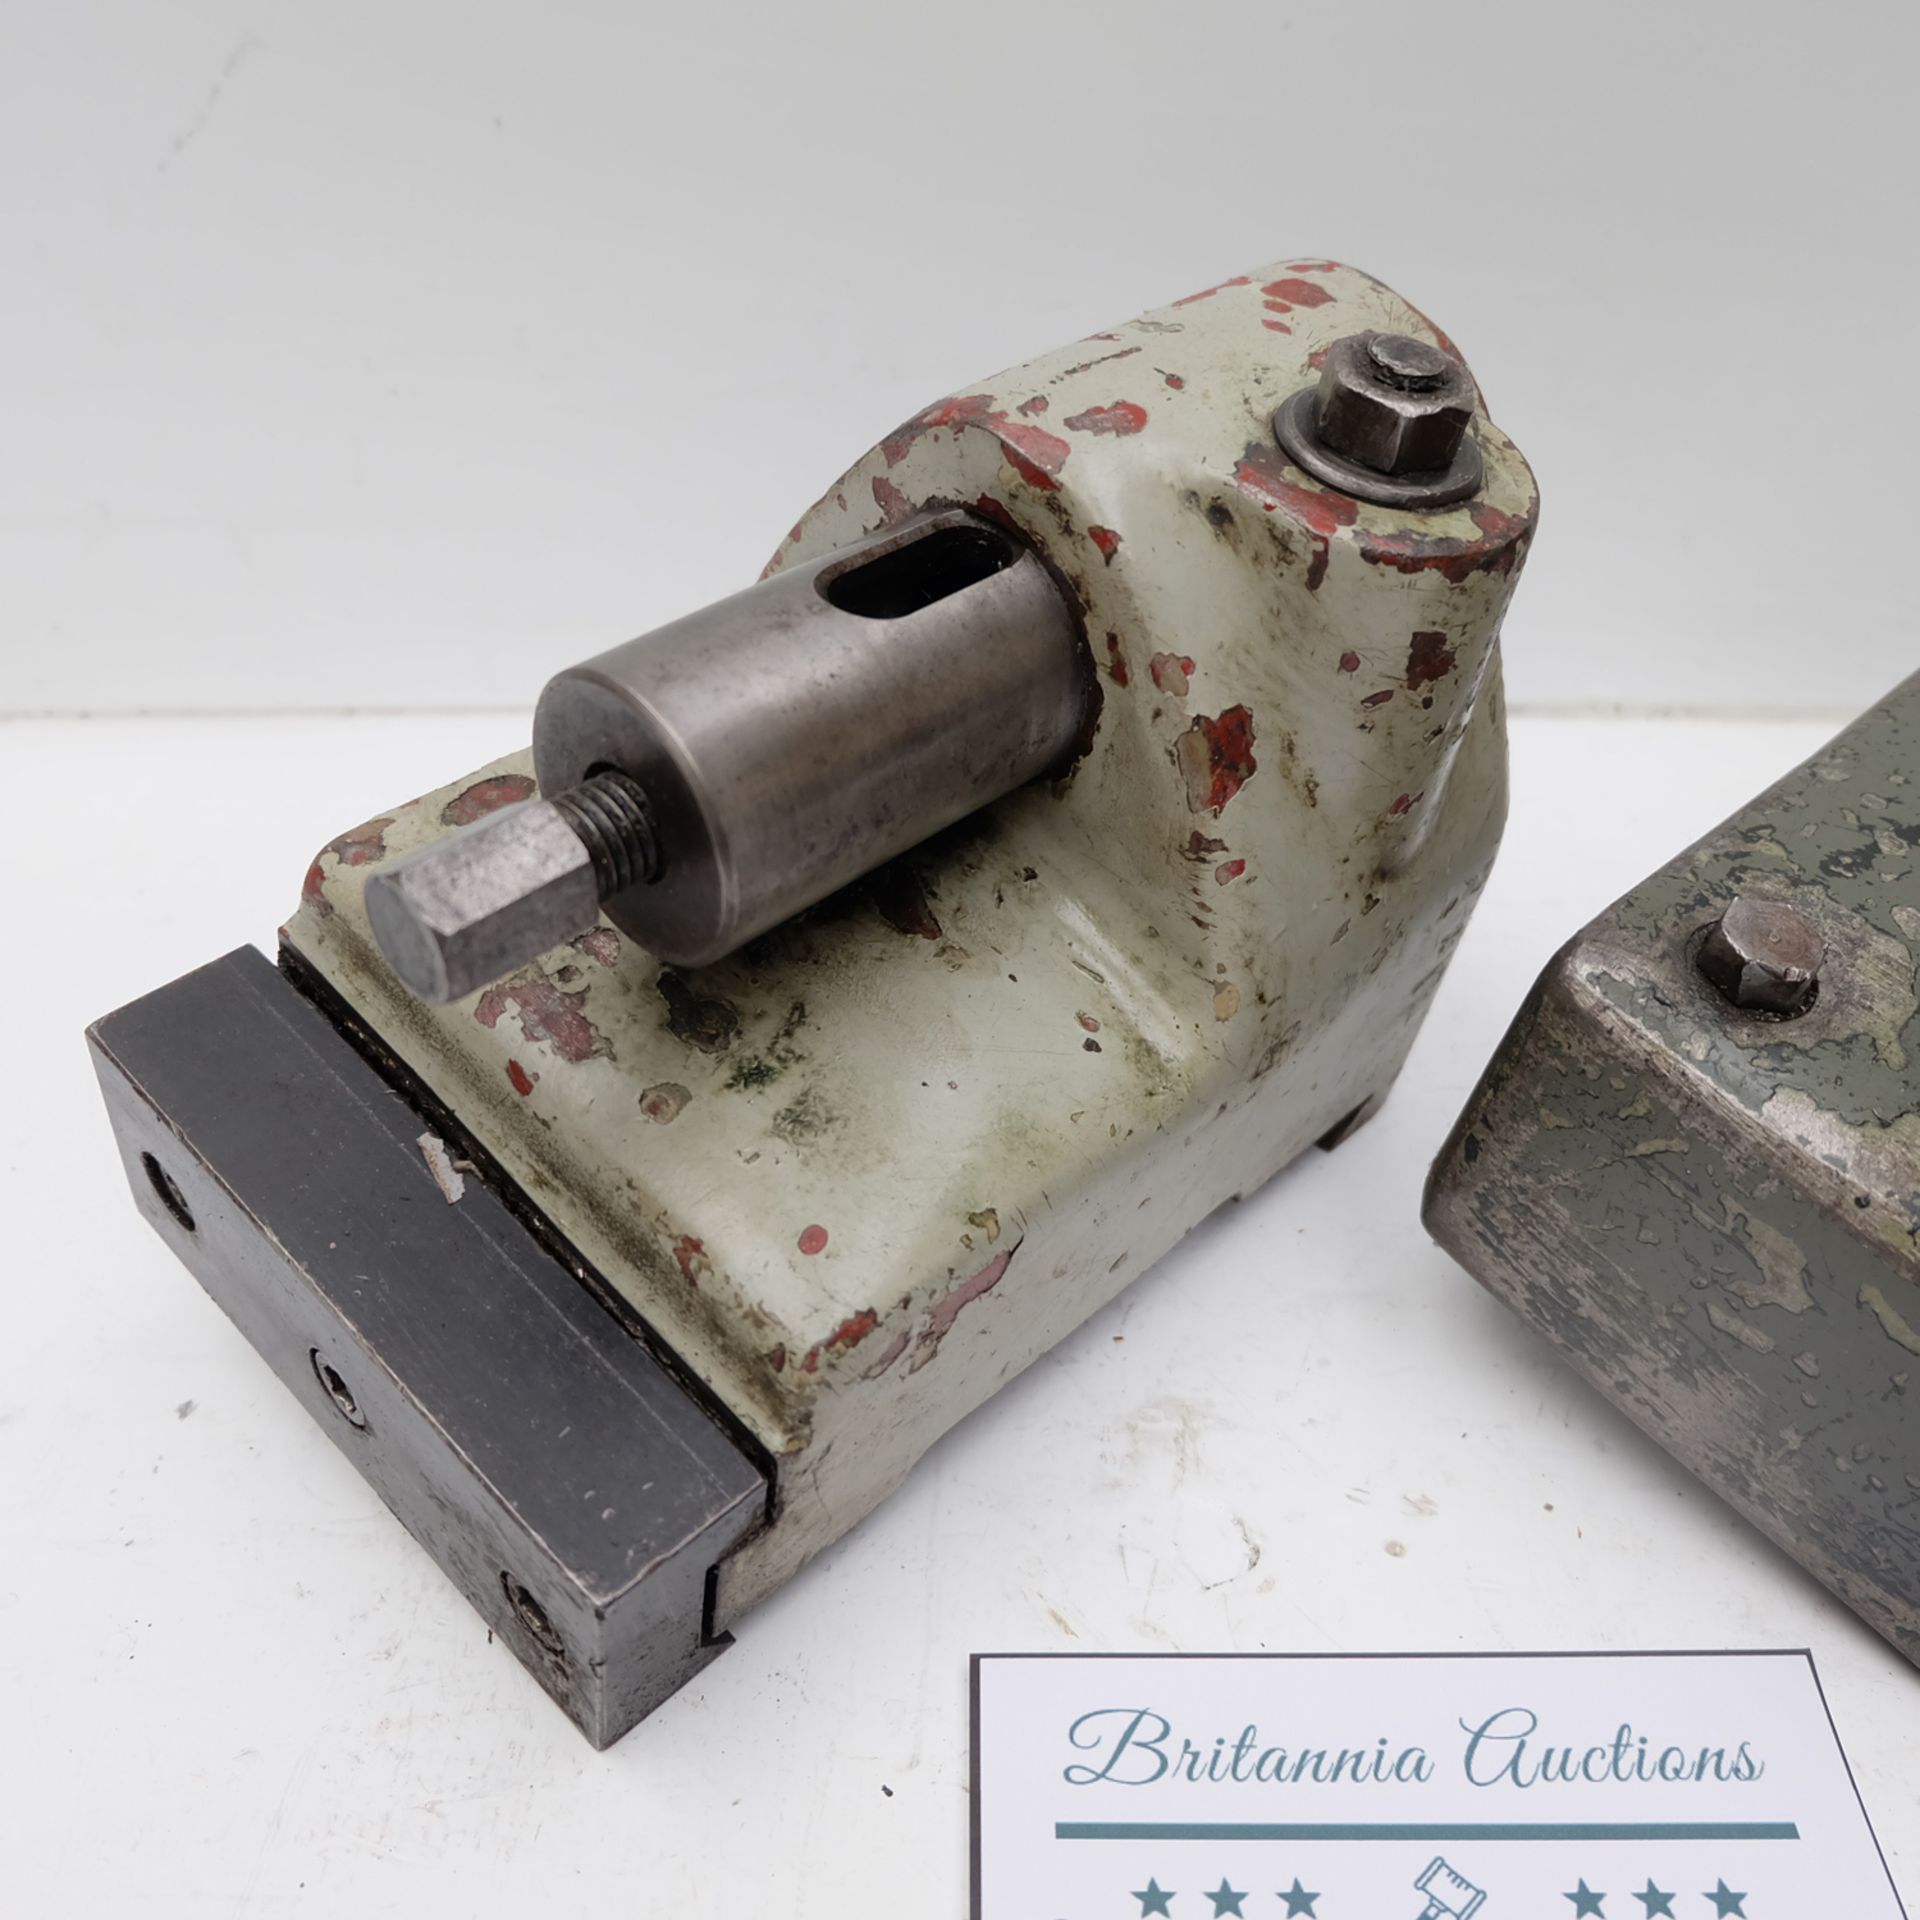 2 x Lathe Power Drilling Attachments. - Image 6 of 6